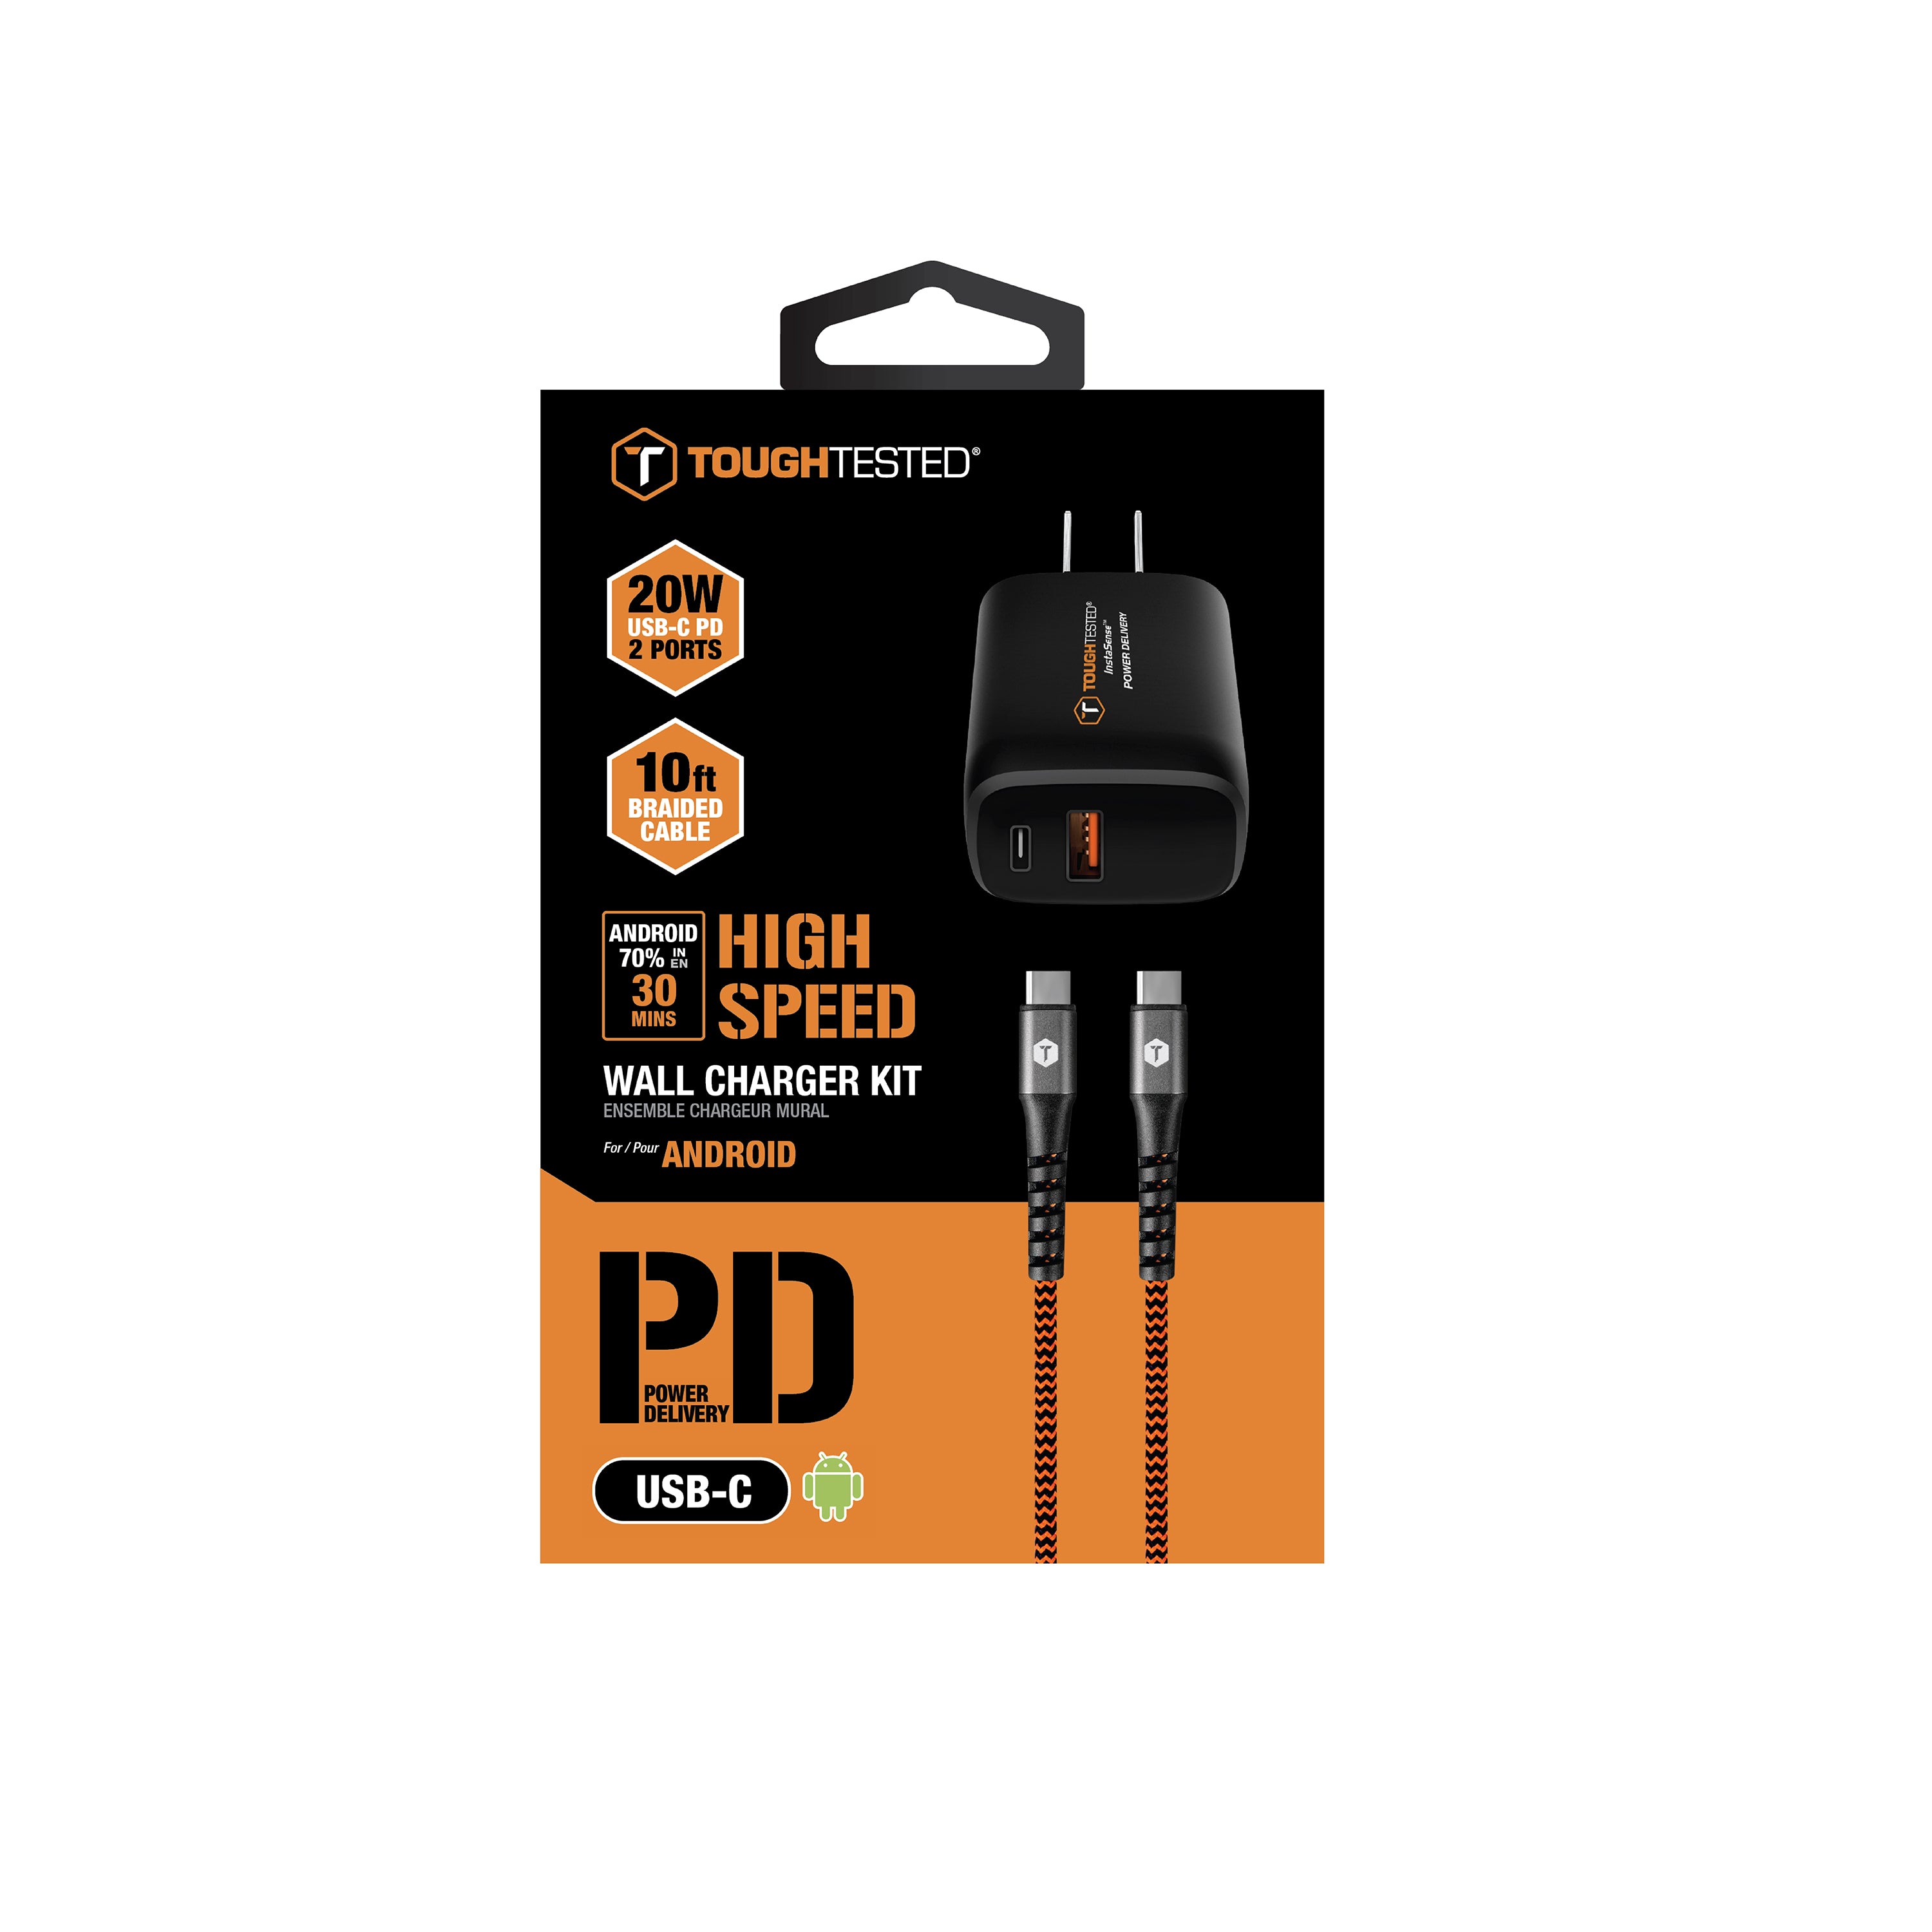 ToughTested 20w PD Type-C Car Charger Kit with 10ft USB-C Cable